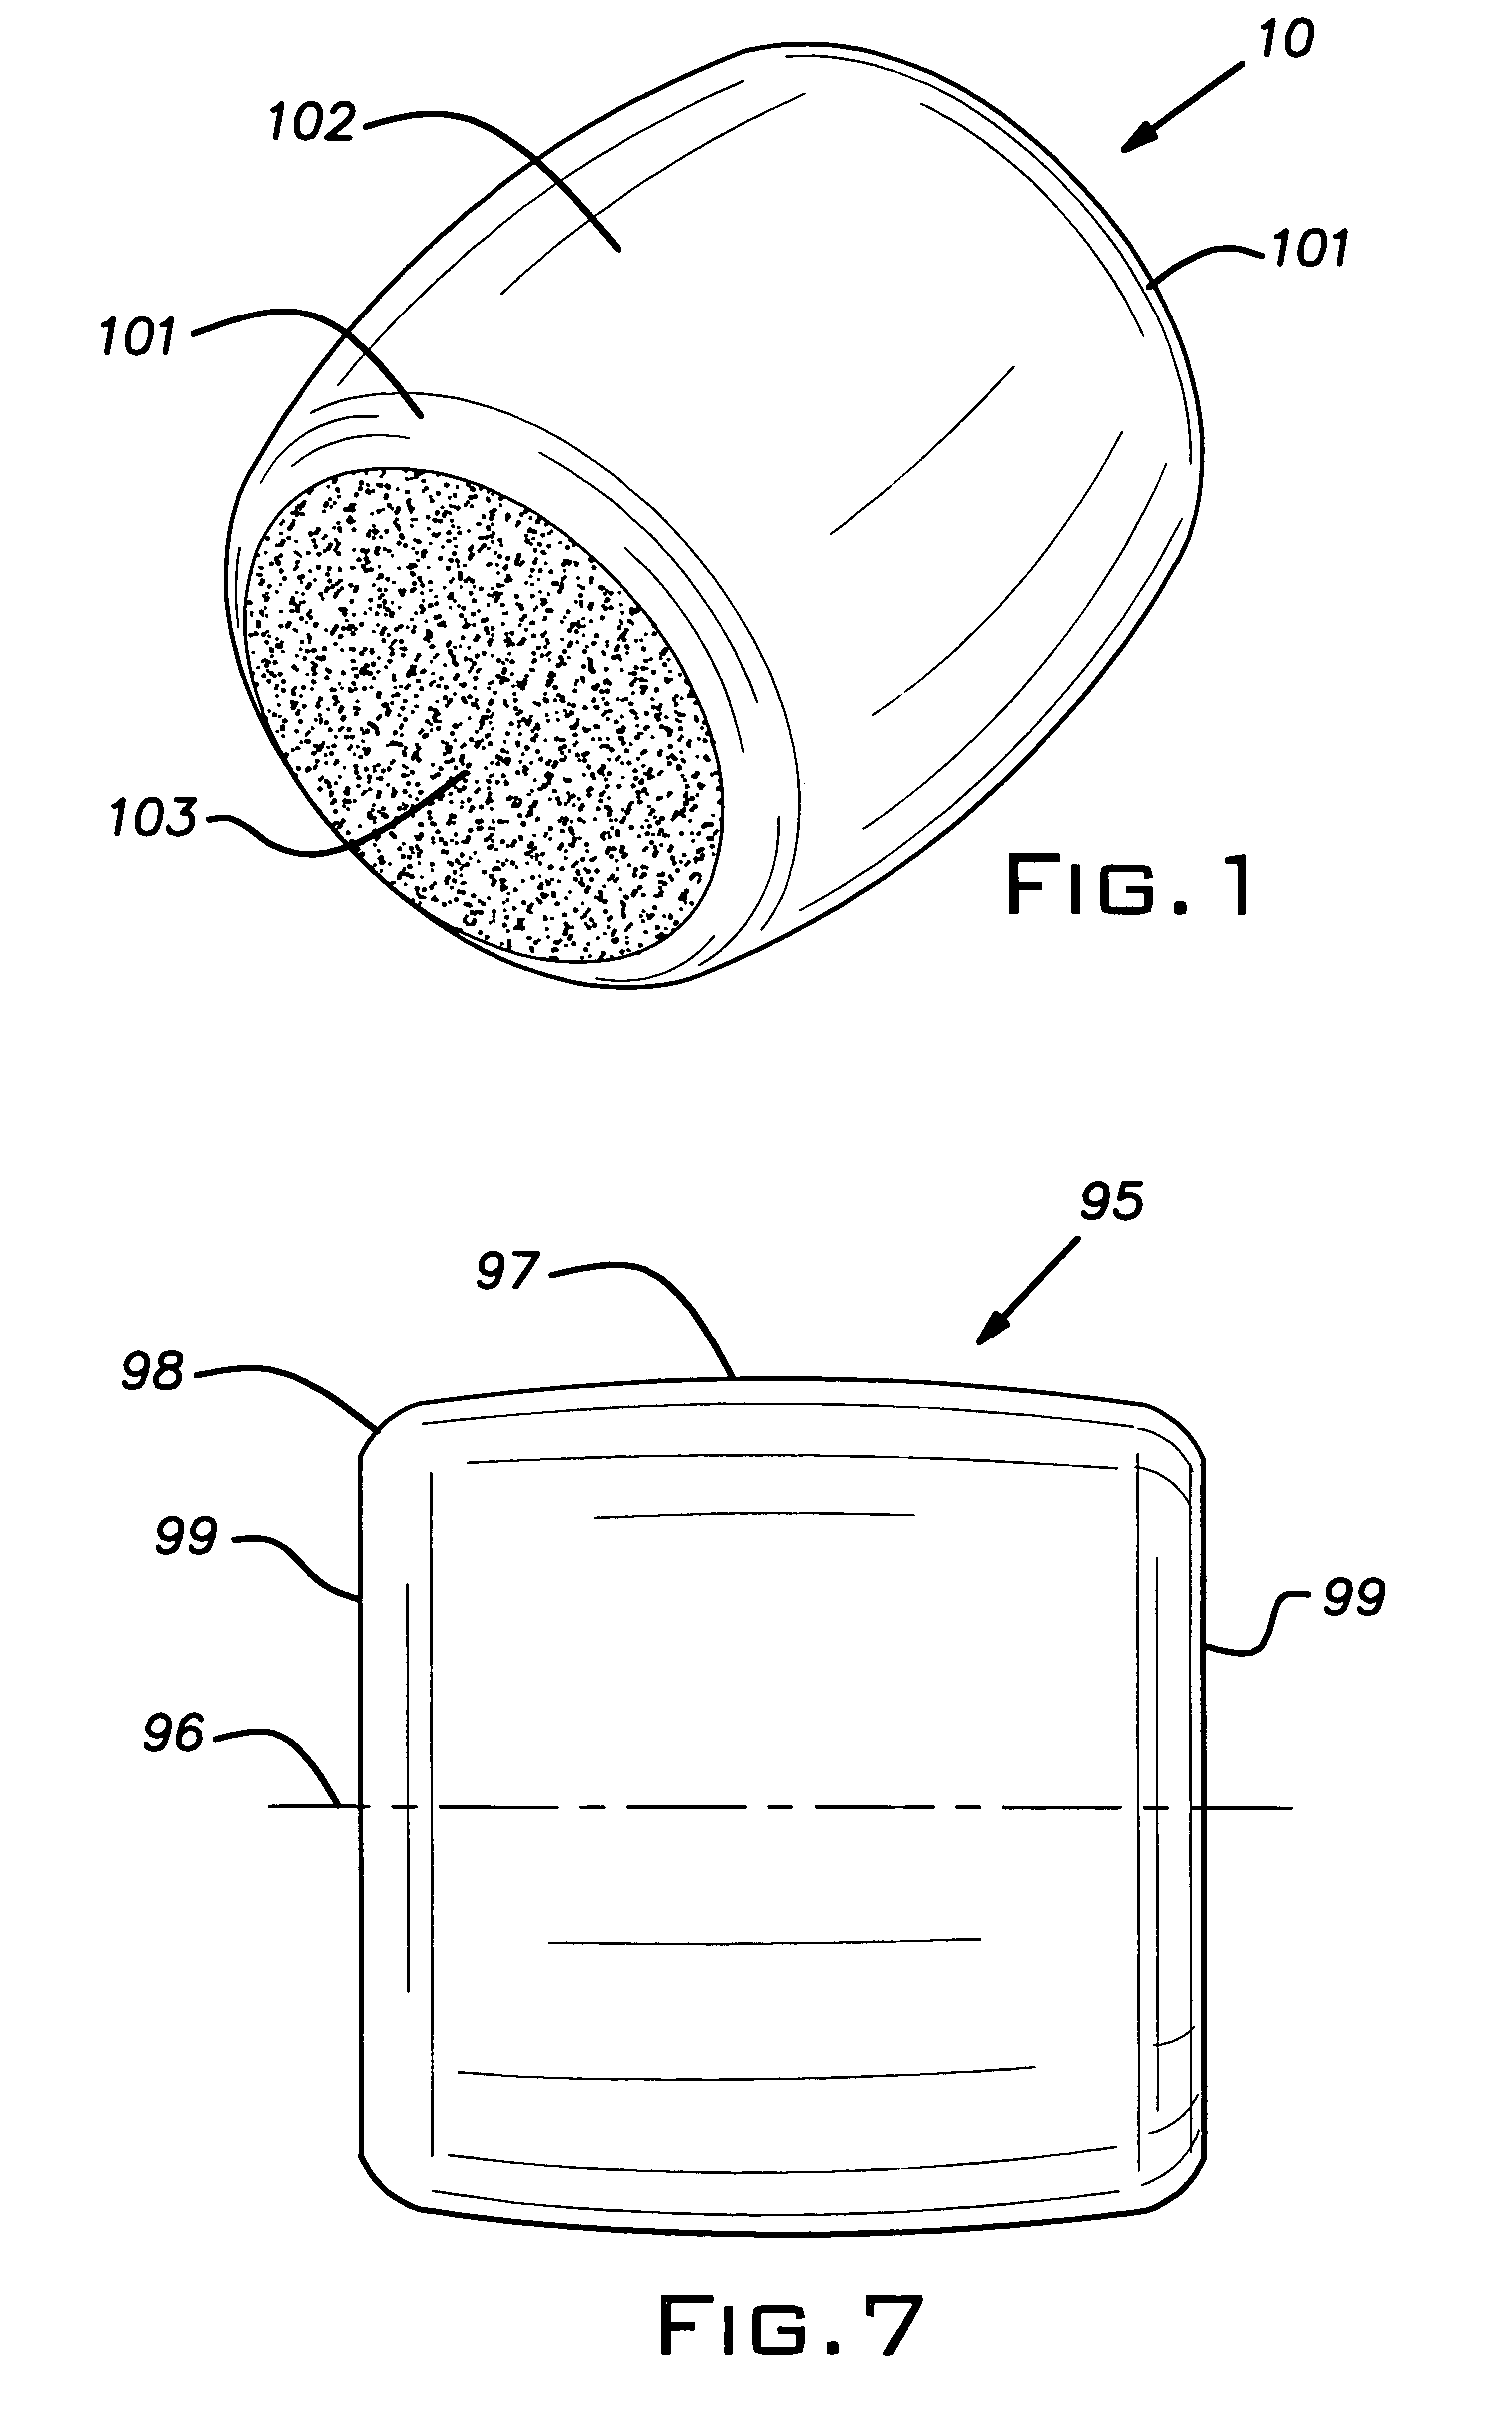 Method of cold-forming near net shape metal roller blanks for anti-friction bearings